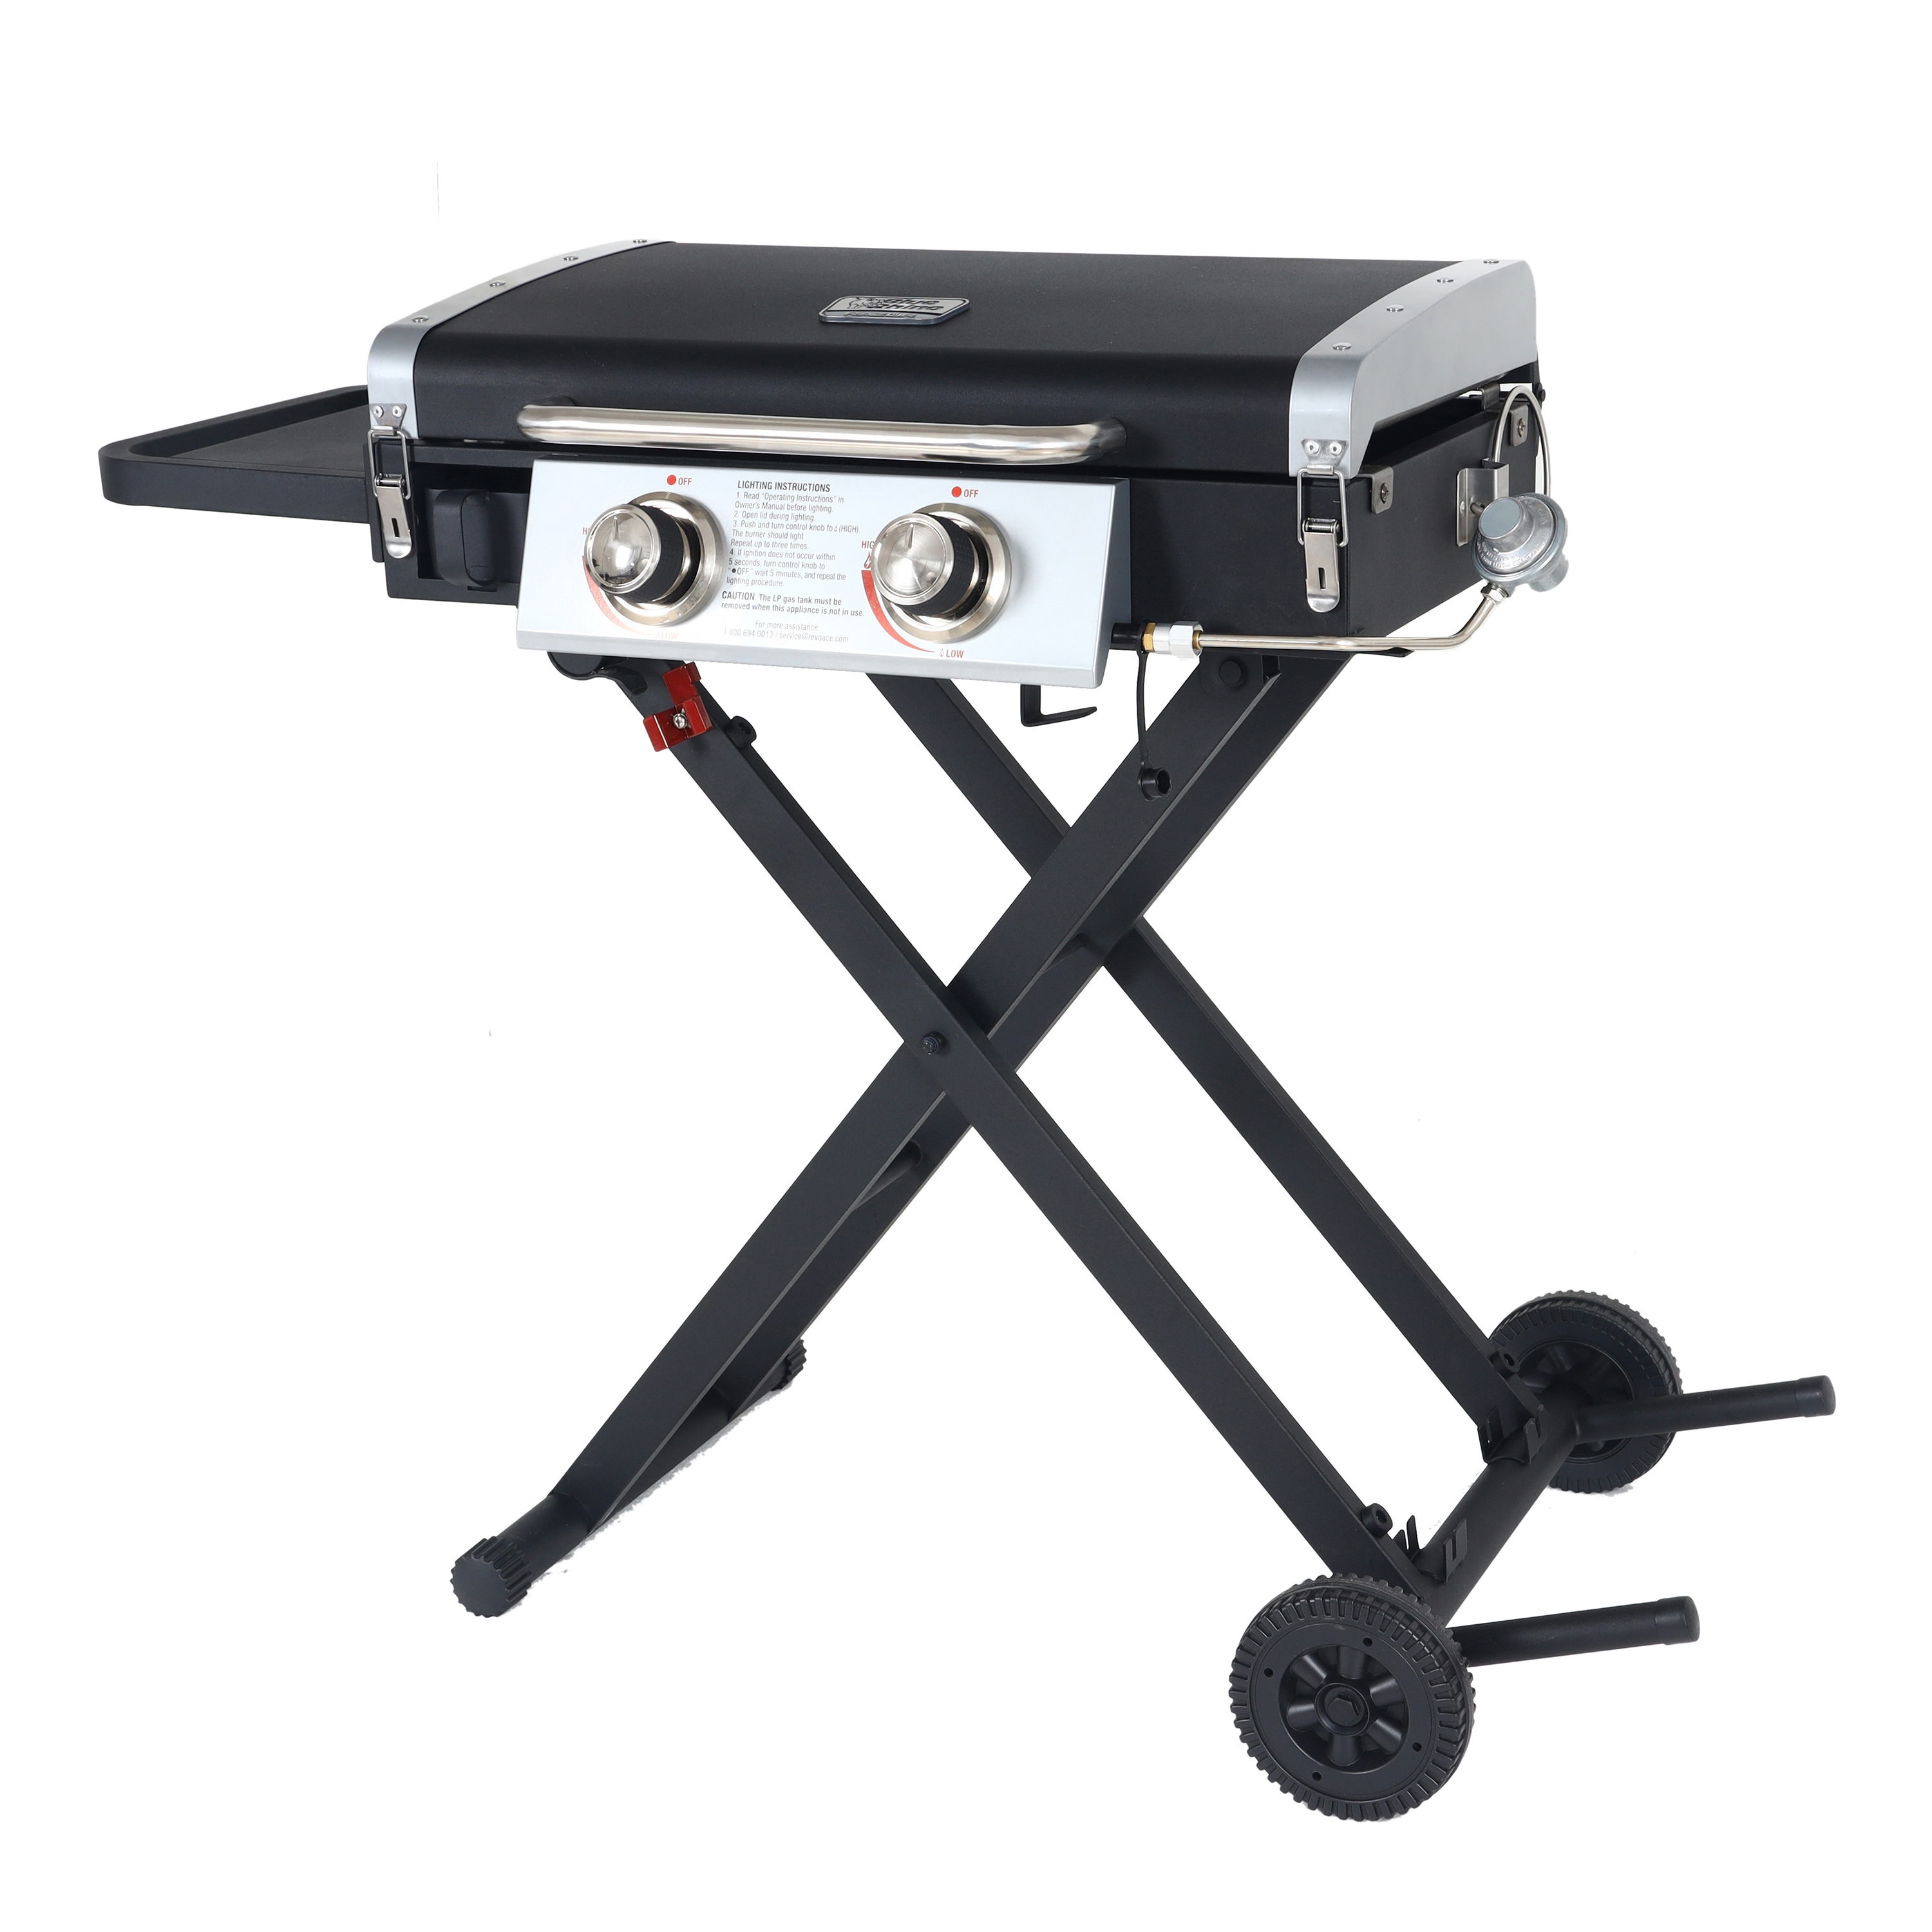 Razor Griddle GGC2030M 25 Inch Outdoor 2 Burner Portable LP Propane Gas  Grill Griddle with Top Cover, Wheels, & Storage Shelf for BBQ Cooking, Black